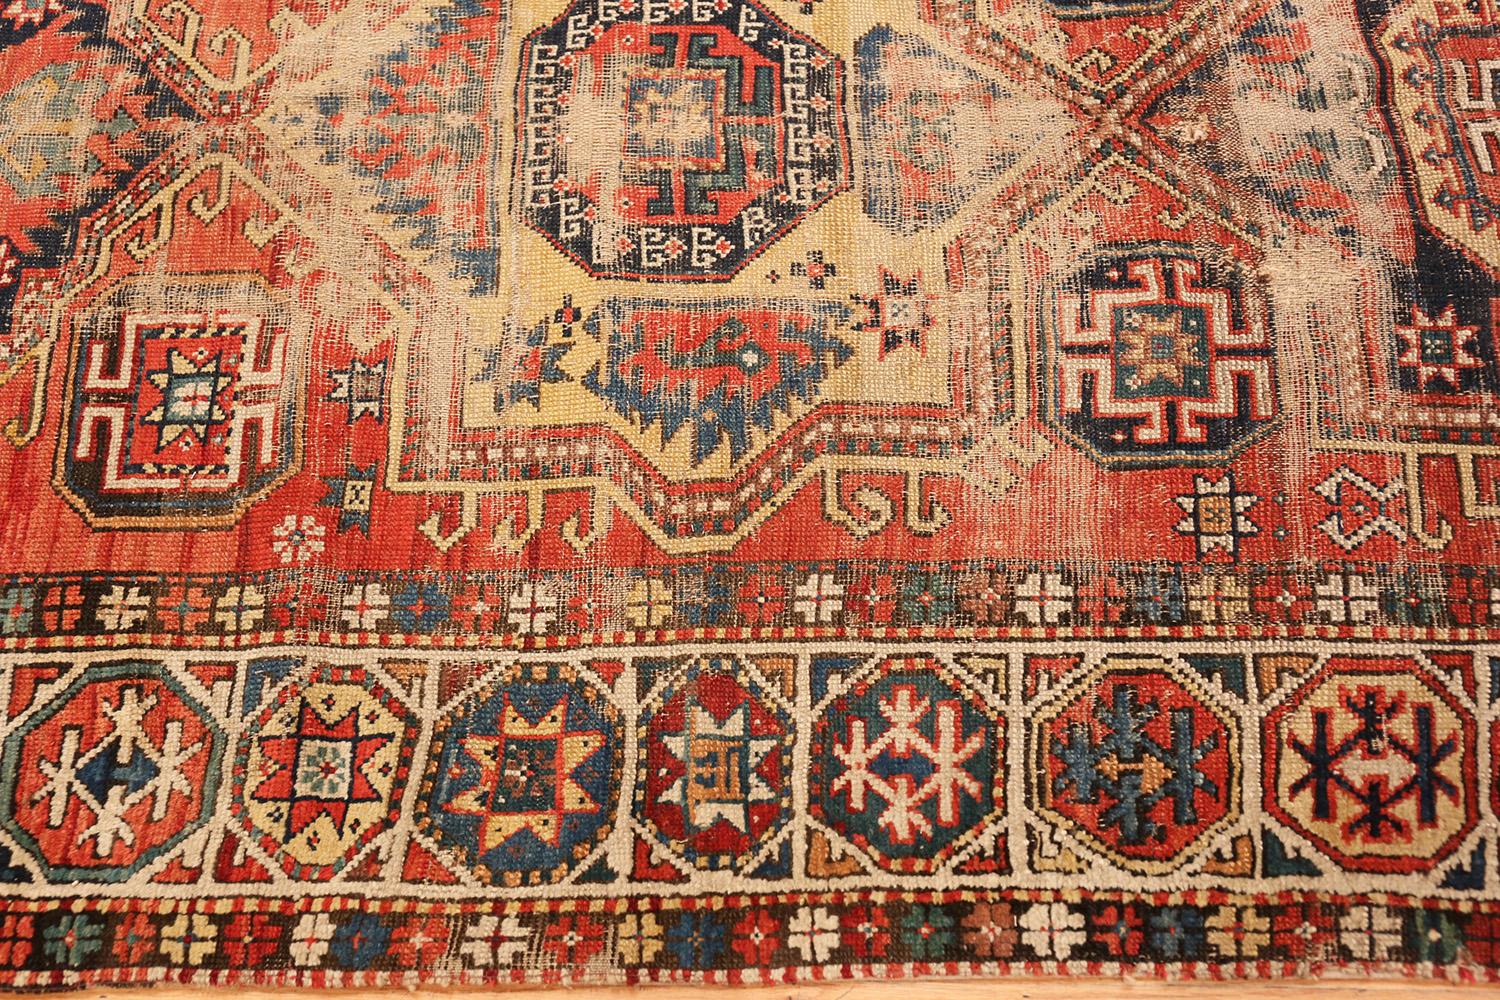 Hand-Knotted Antique Shabby Chic Caucasian Kazak Rug. Size: 4 ft 10 in x 9 ft 6 in